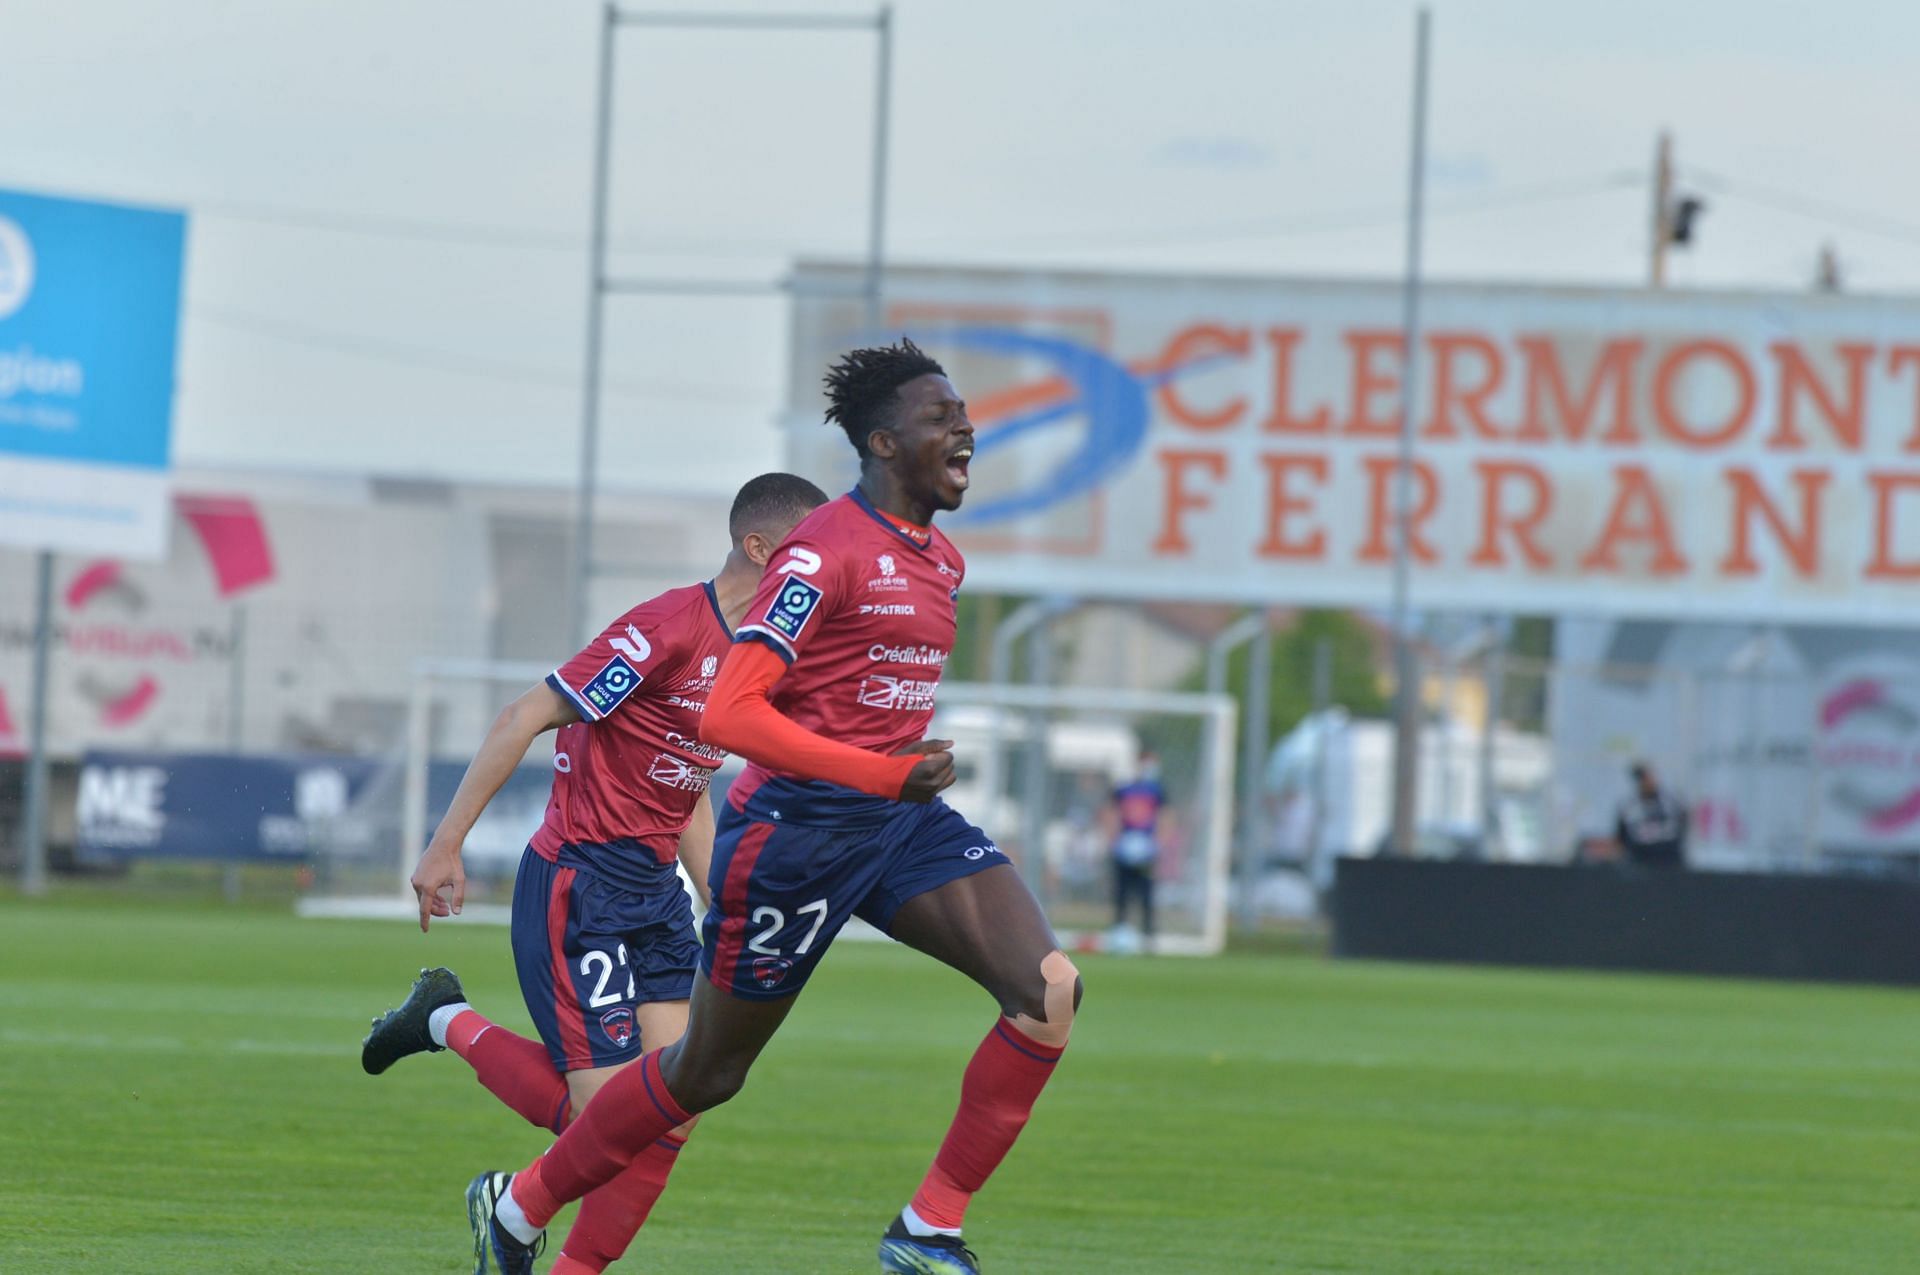 Clermont Foot will meet Metz in the Coupe de France on Friday